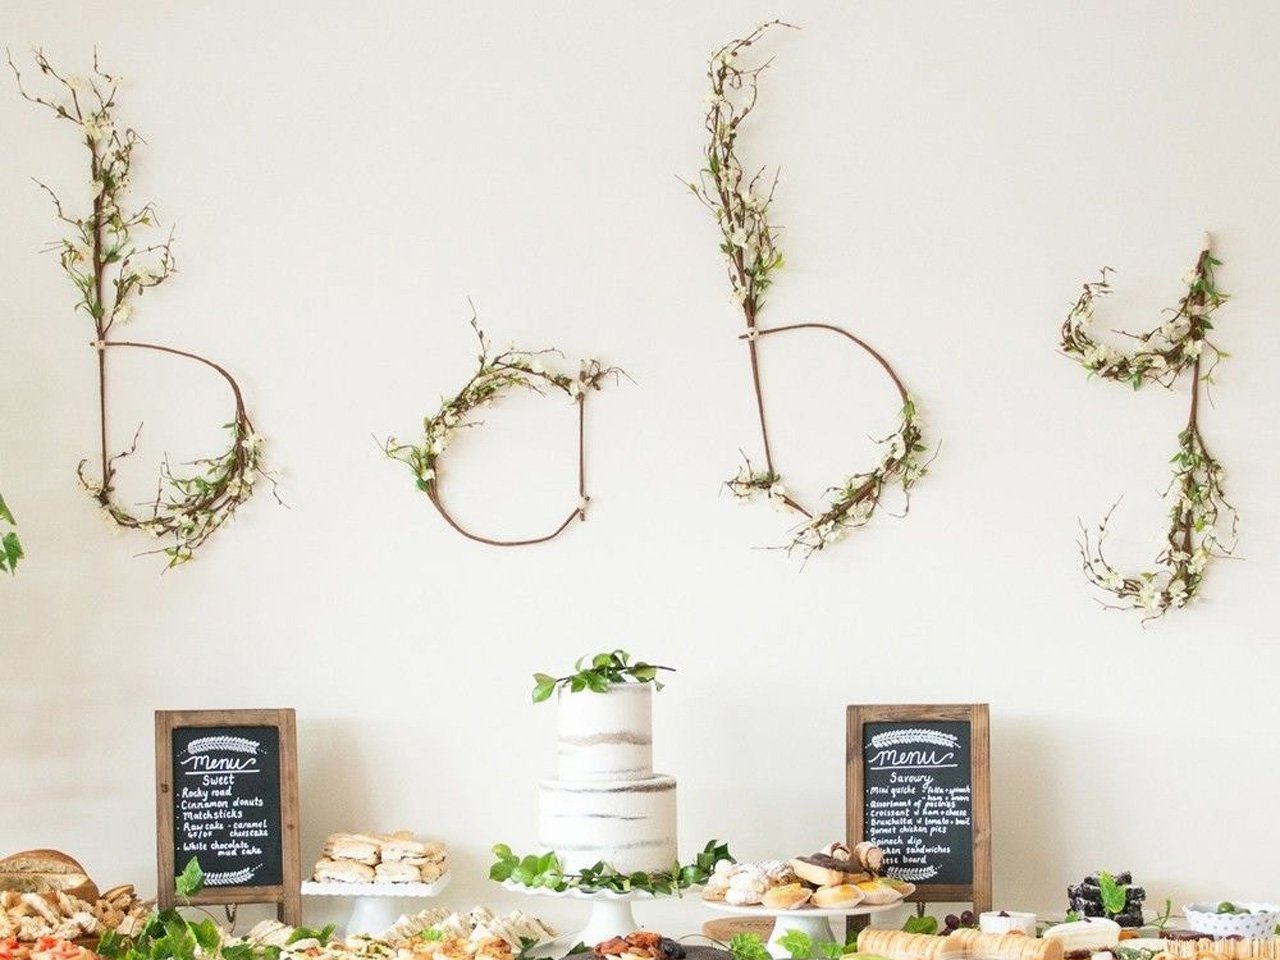 Baby spelled out in twigs with flowers and a table of food